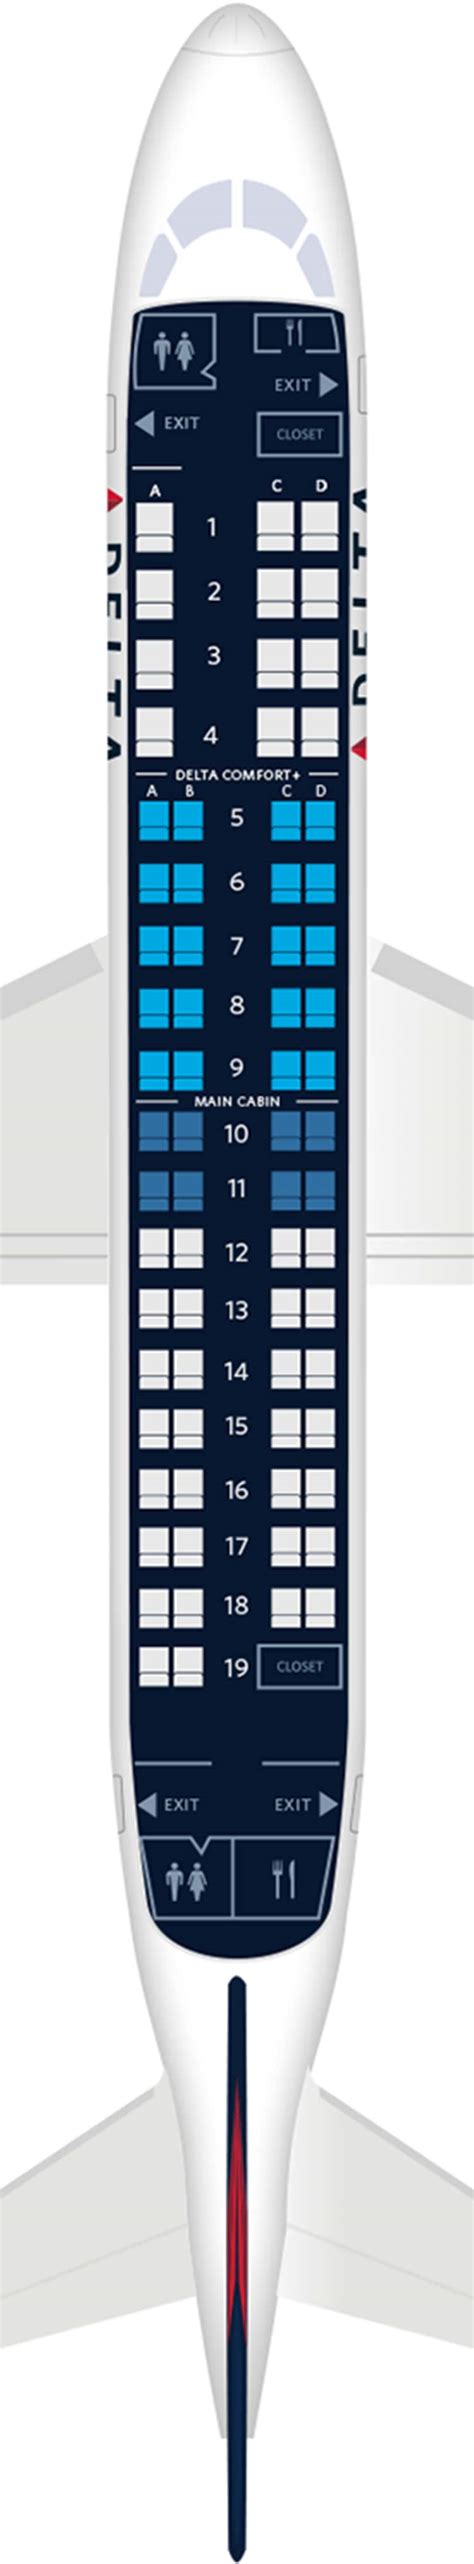 Aa 175 seat map. View all available seats on your next American Airlines flight. Our comprehensive seat maps and seating charts on AA.com display seat availability for every aircraft type. 